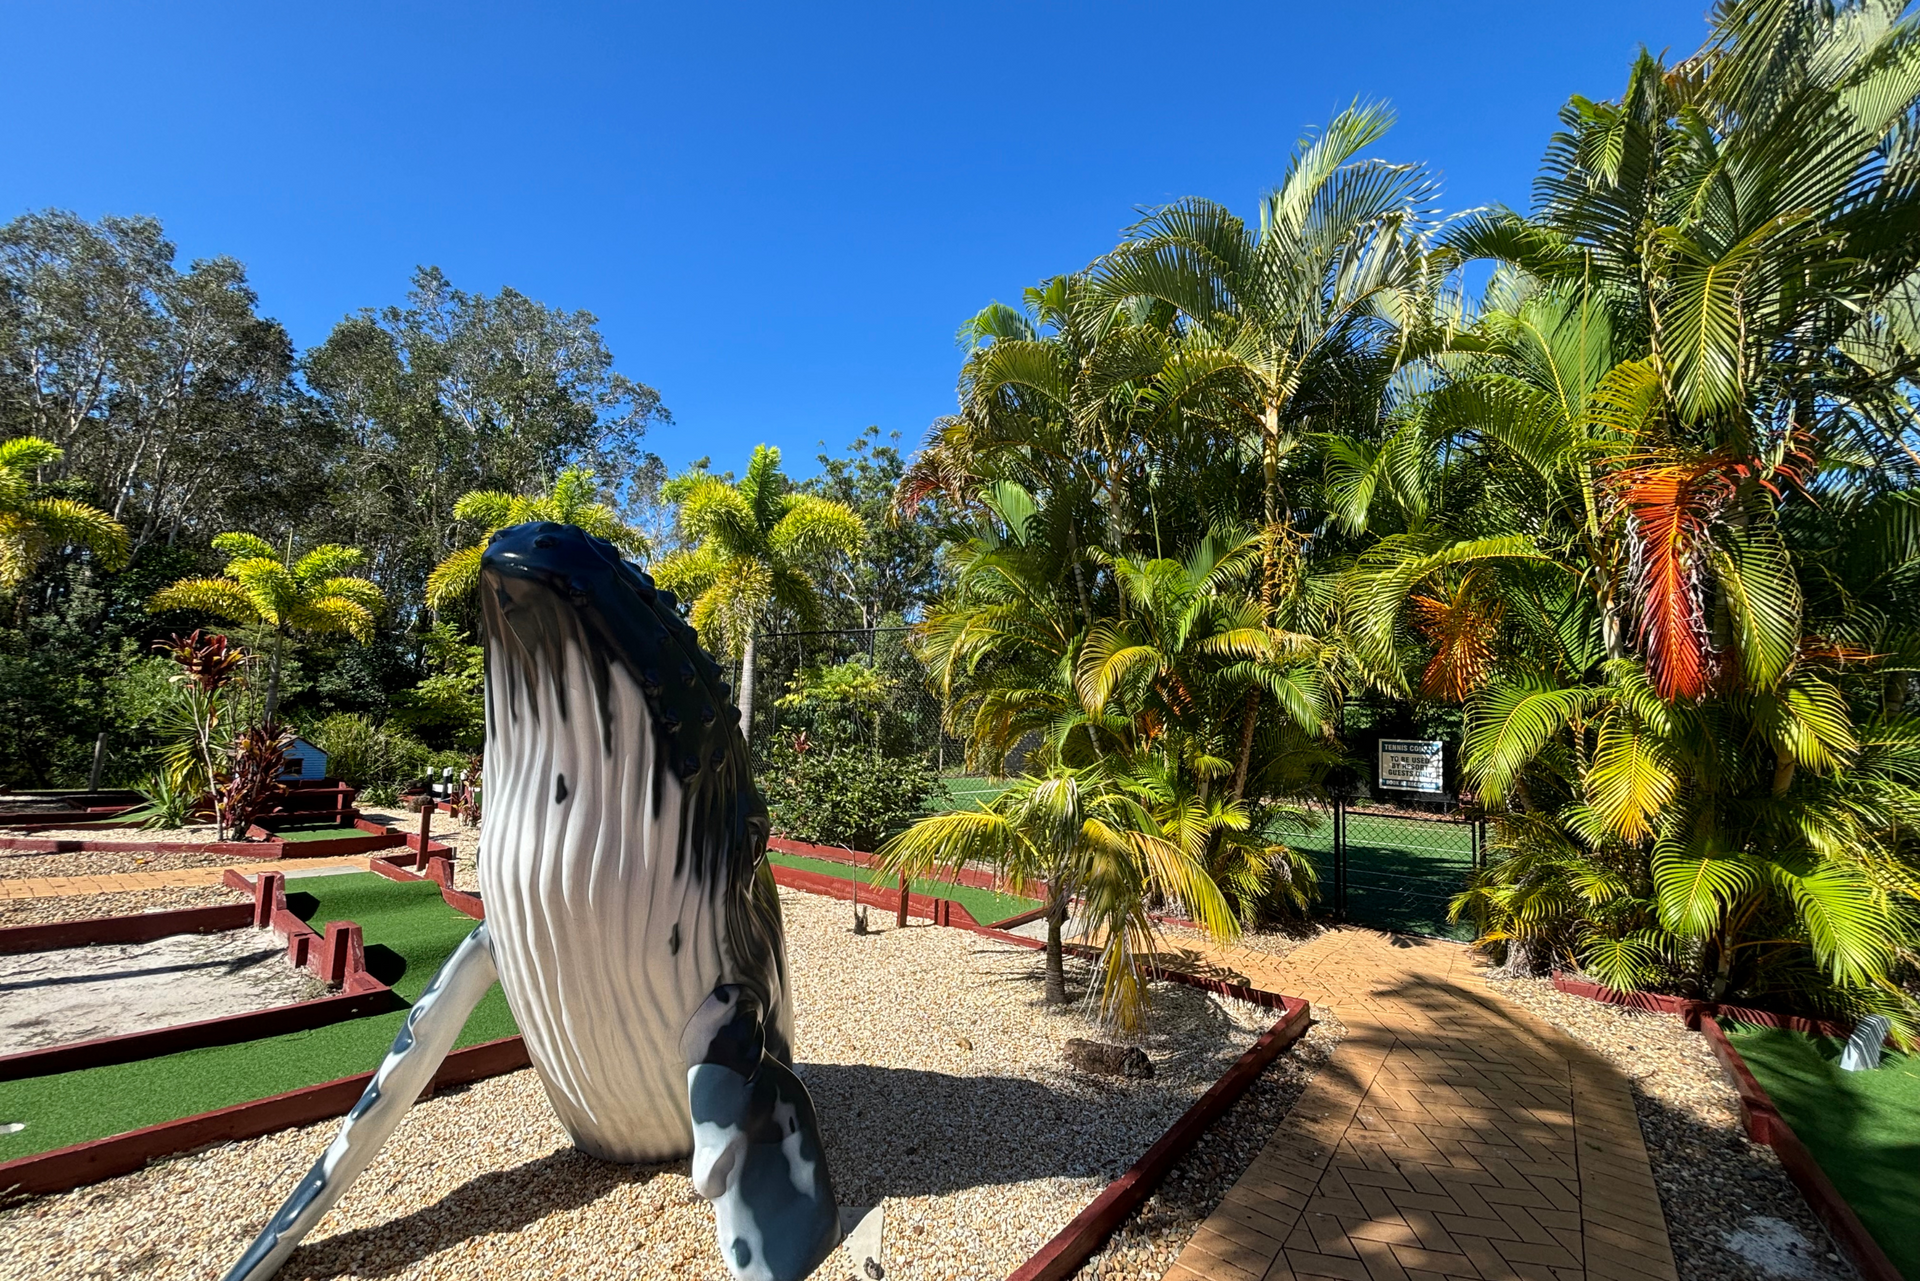 A whale statue is sitting on top of a dirt path in a park.